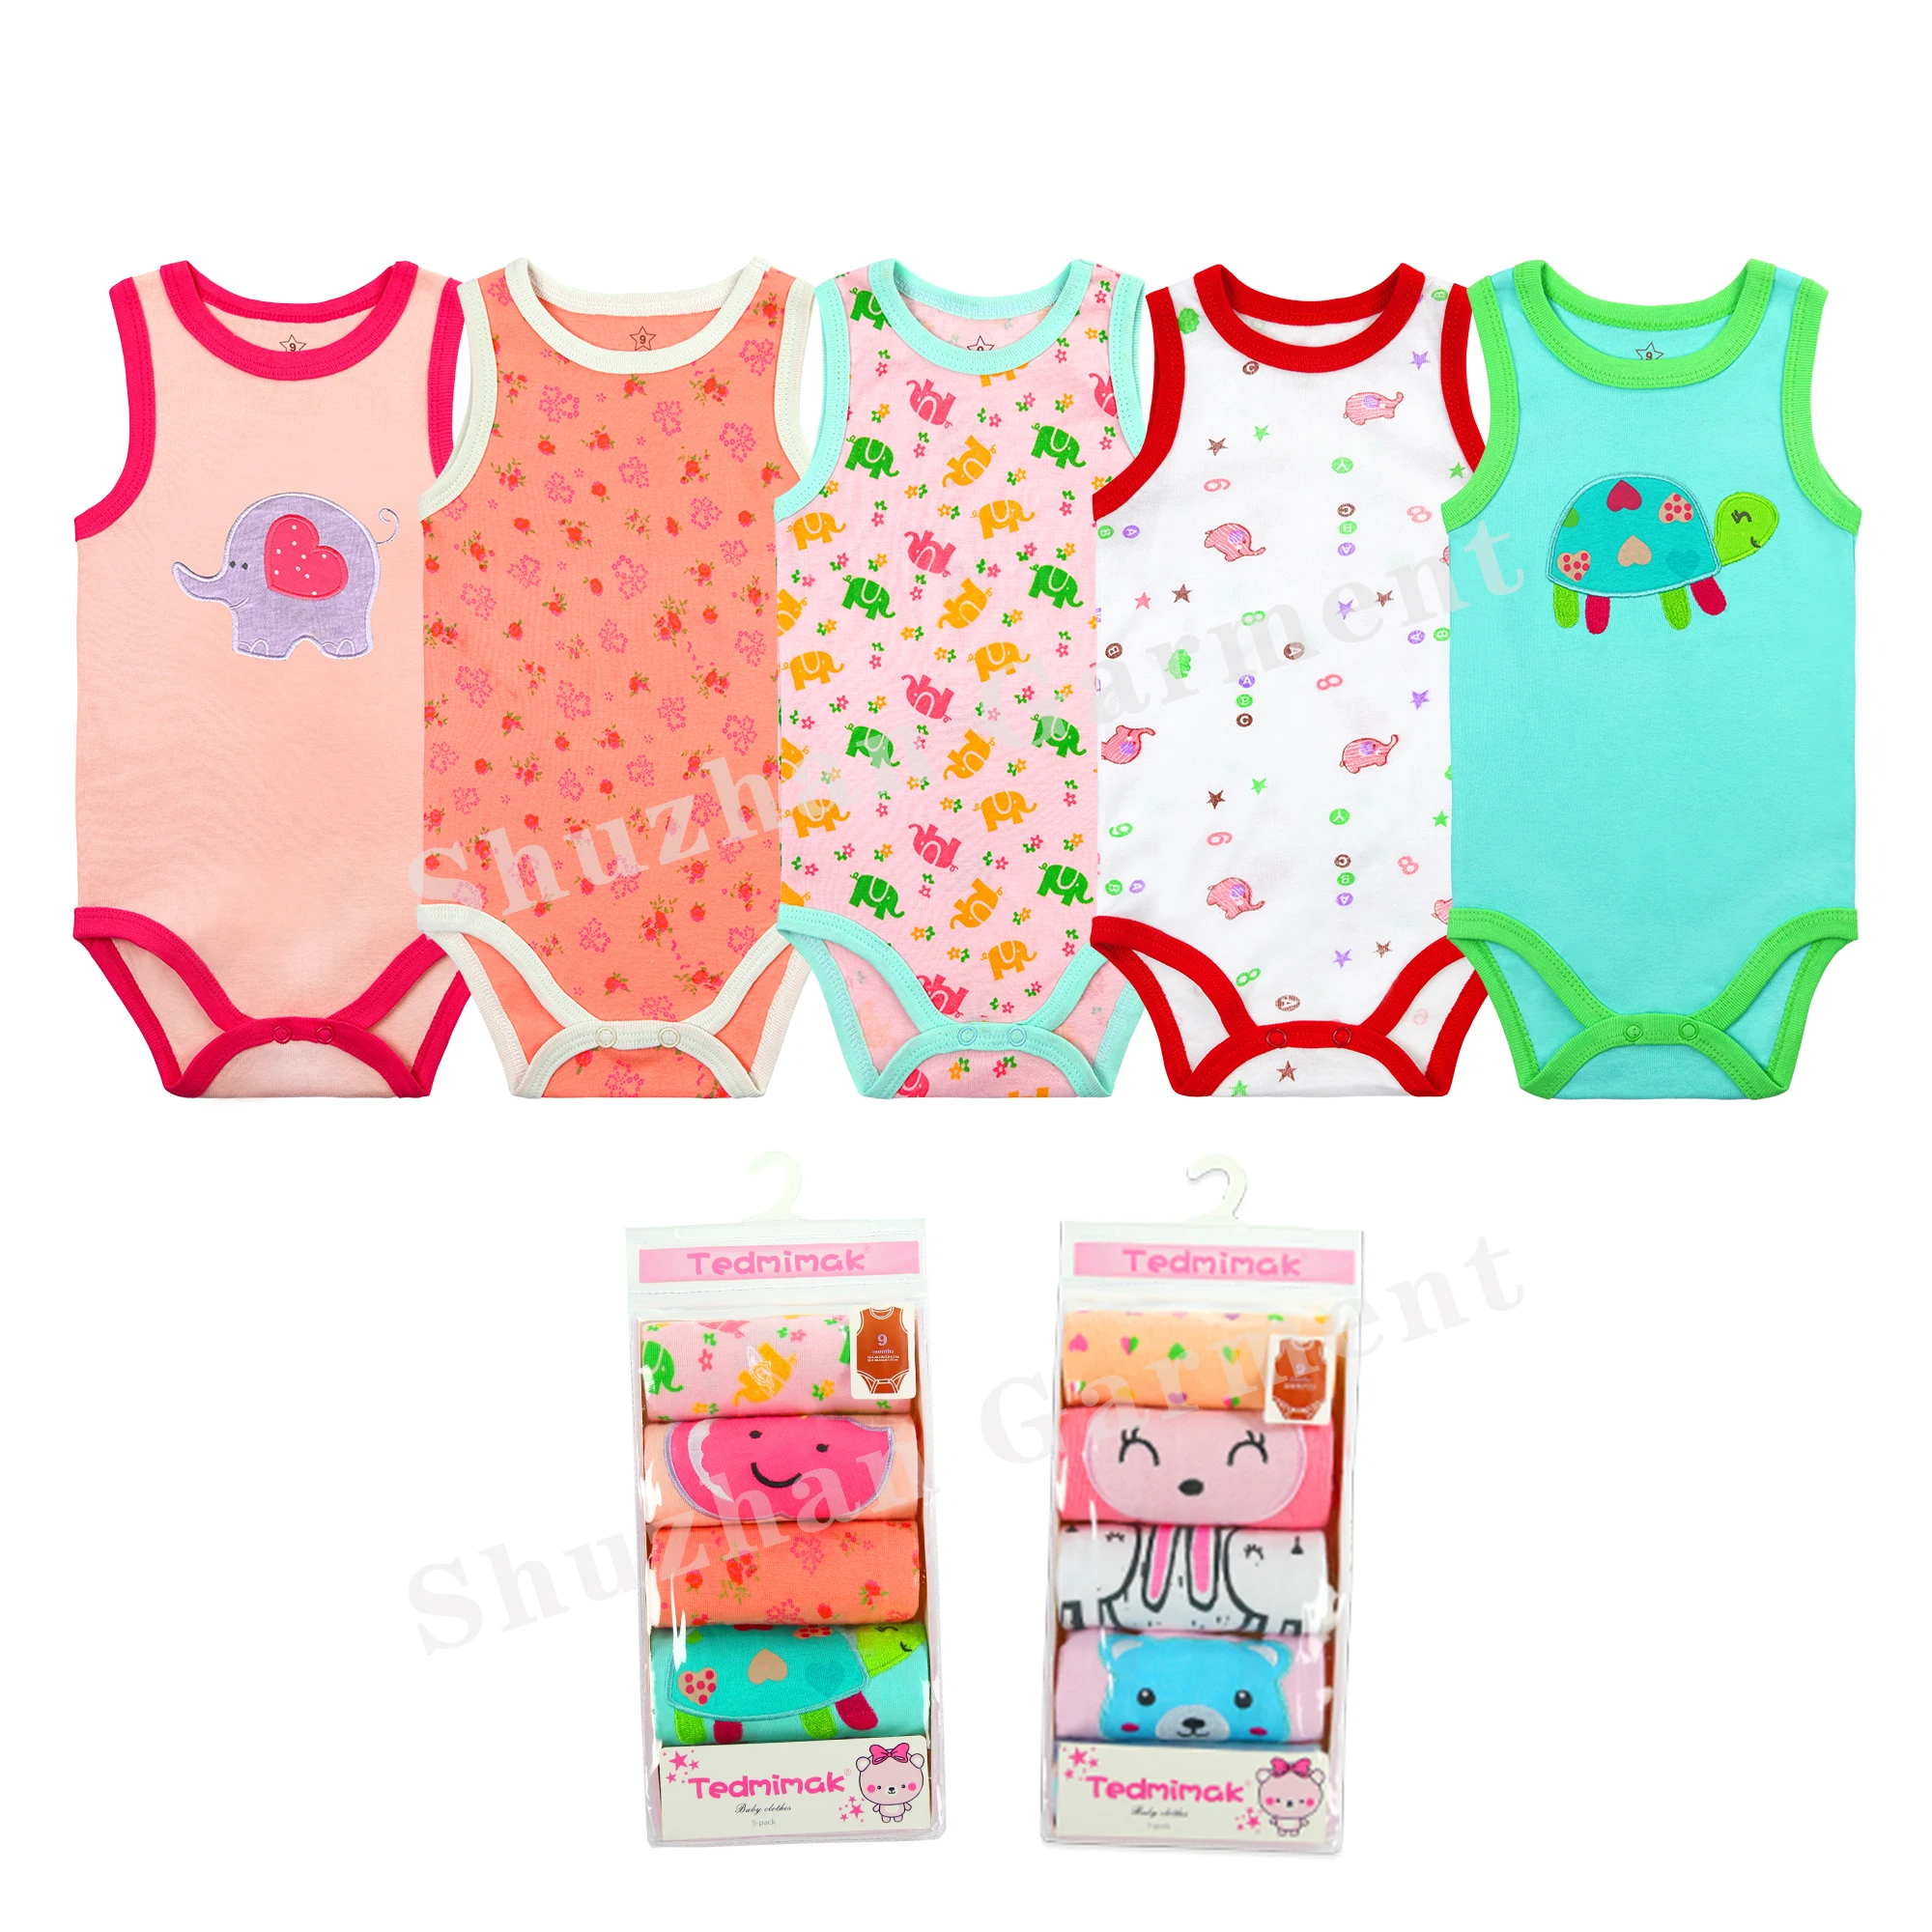 

sleeveless baby rompers Cheap baby romper set 5 pieces infant cotton, Mixed colors in same size